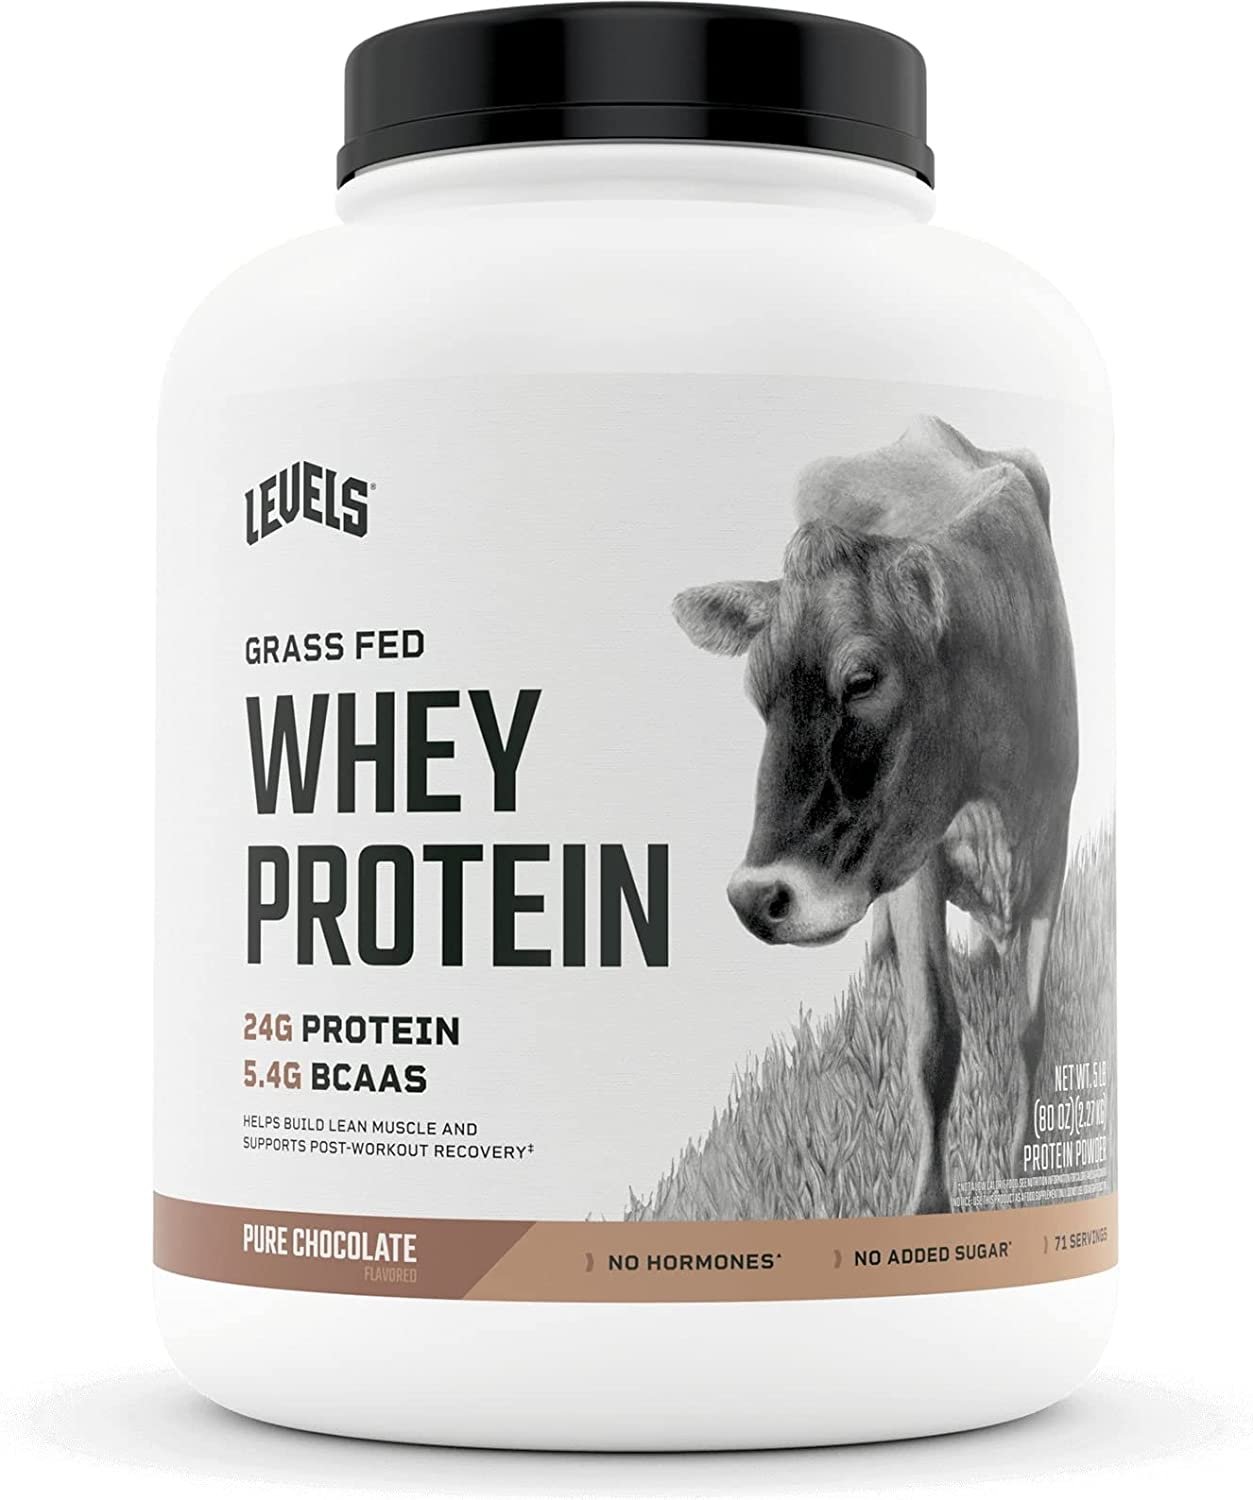 Levels Grass Fed 100% Whey Protein